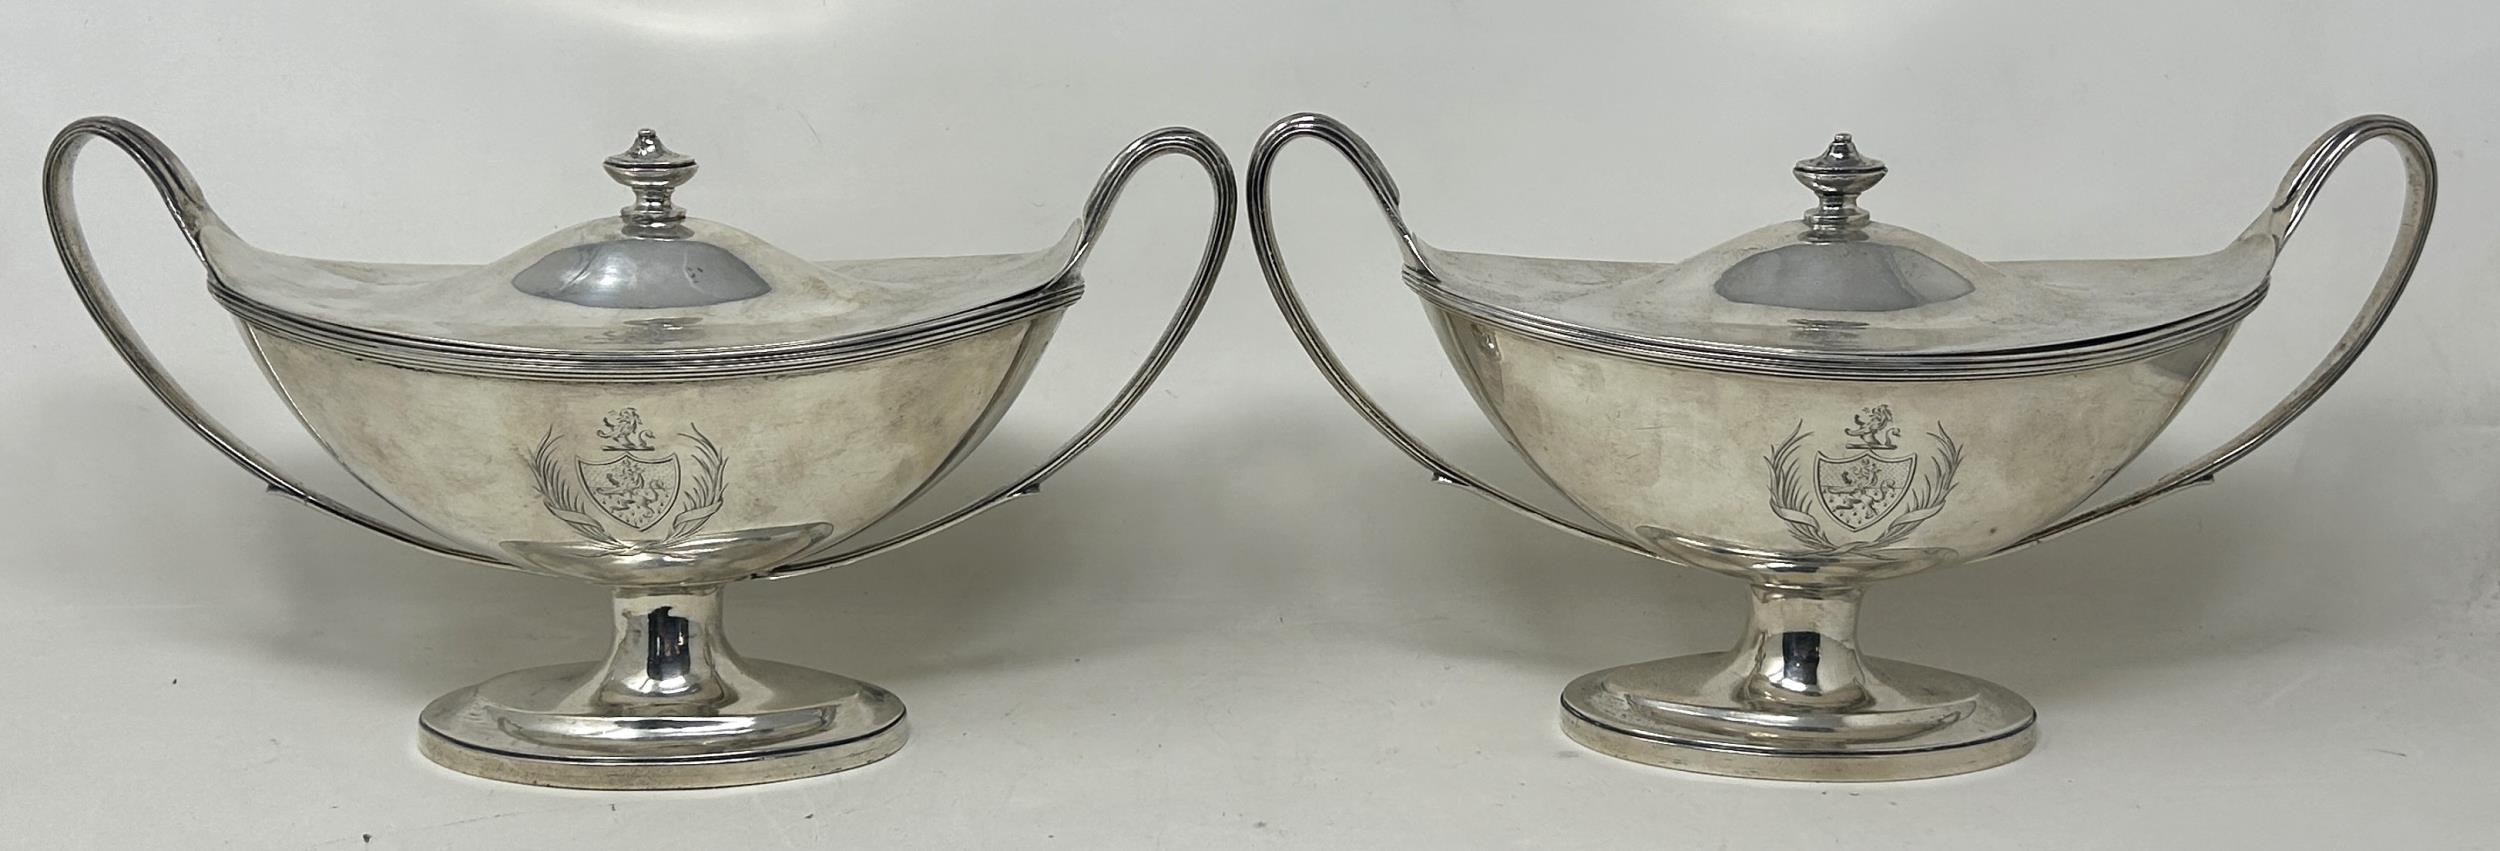 A pair of George III silver tureens and covers, of navette form, London 1791, 36.9 ozt (2) - Image 7 of 12